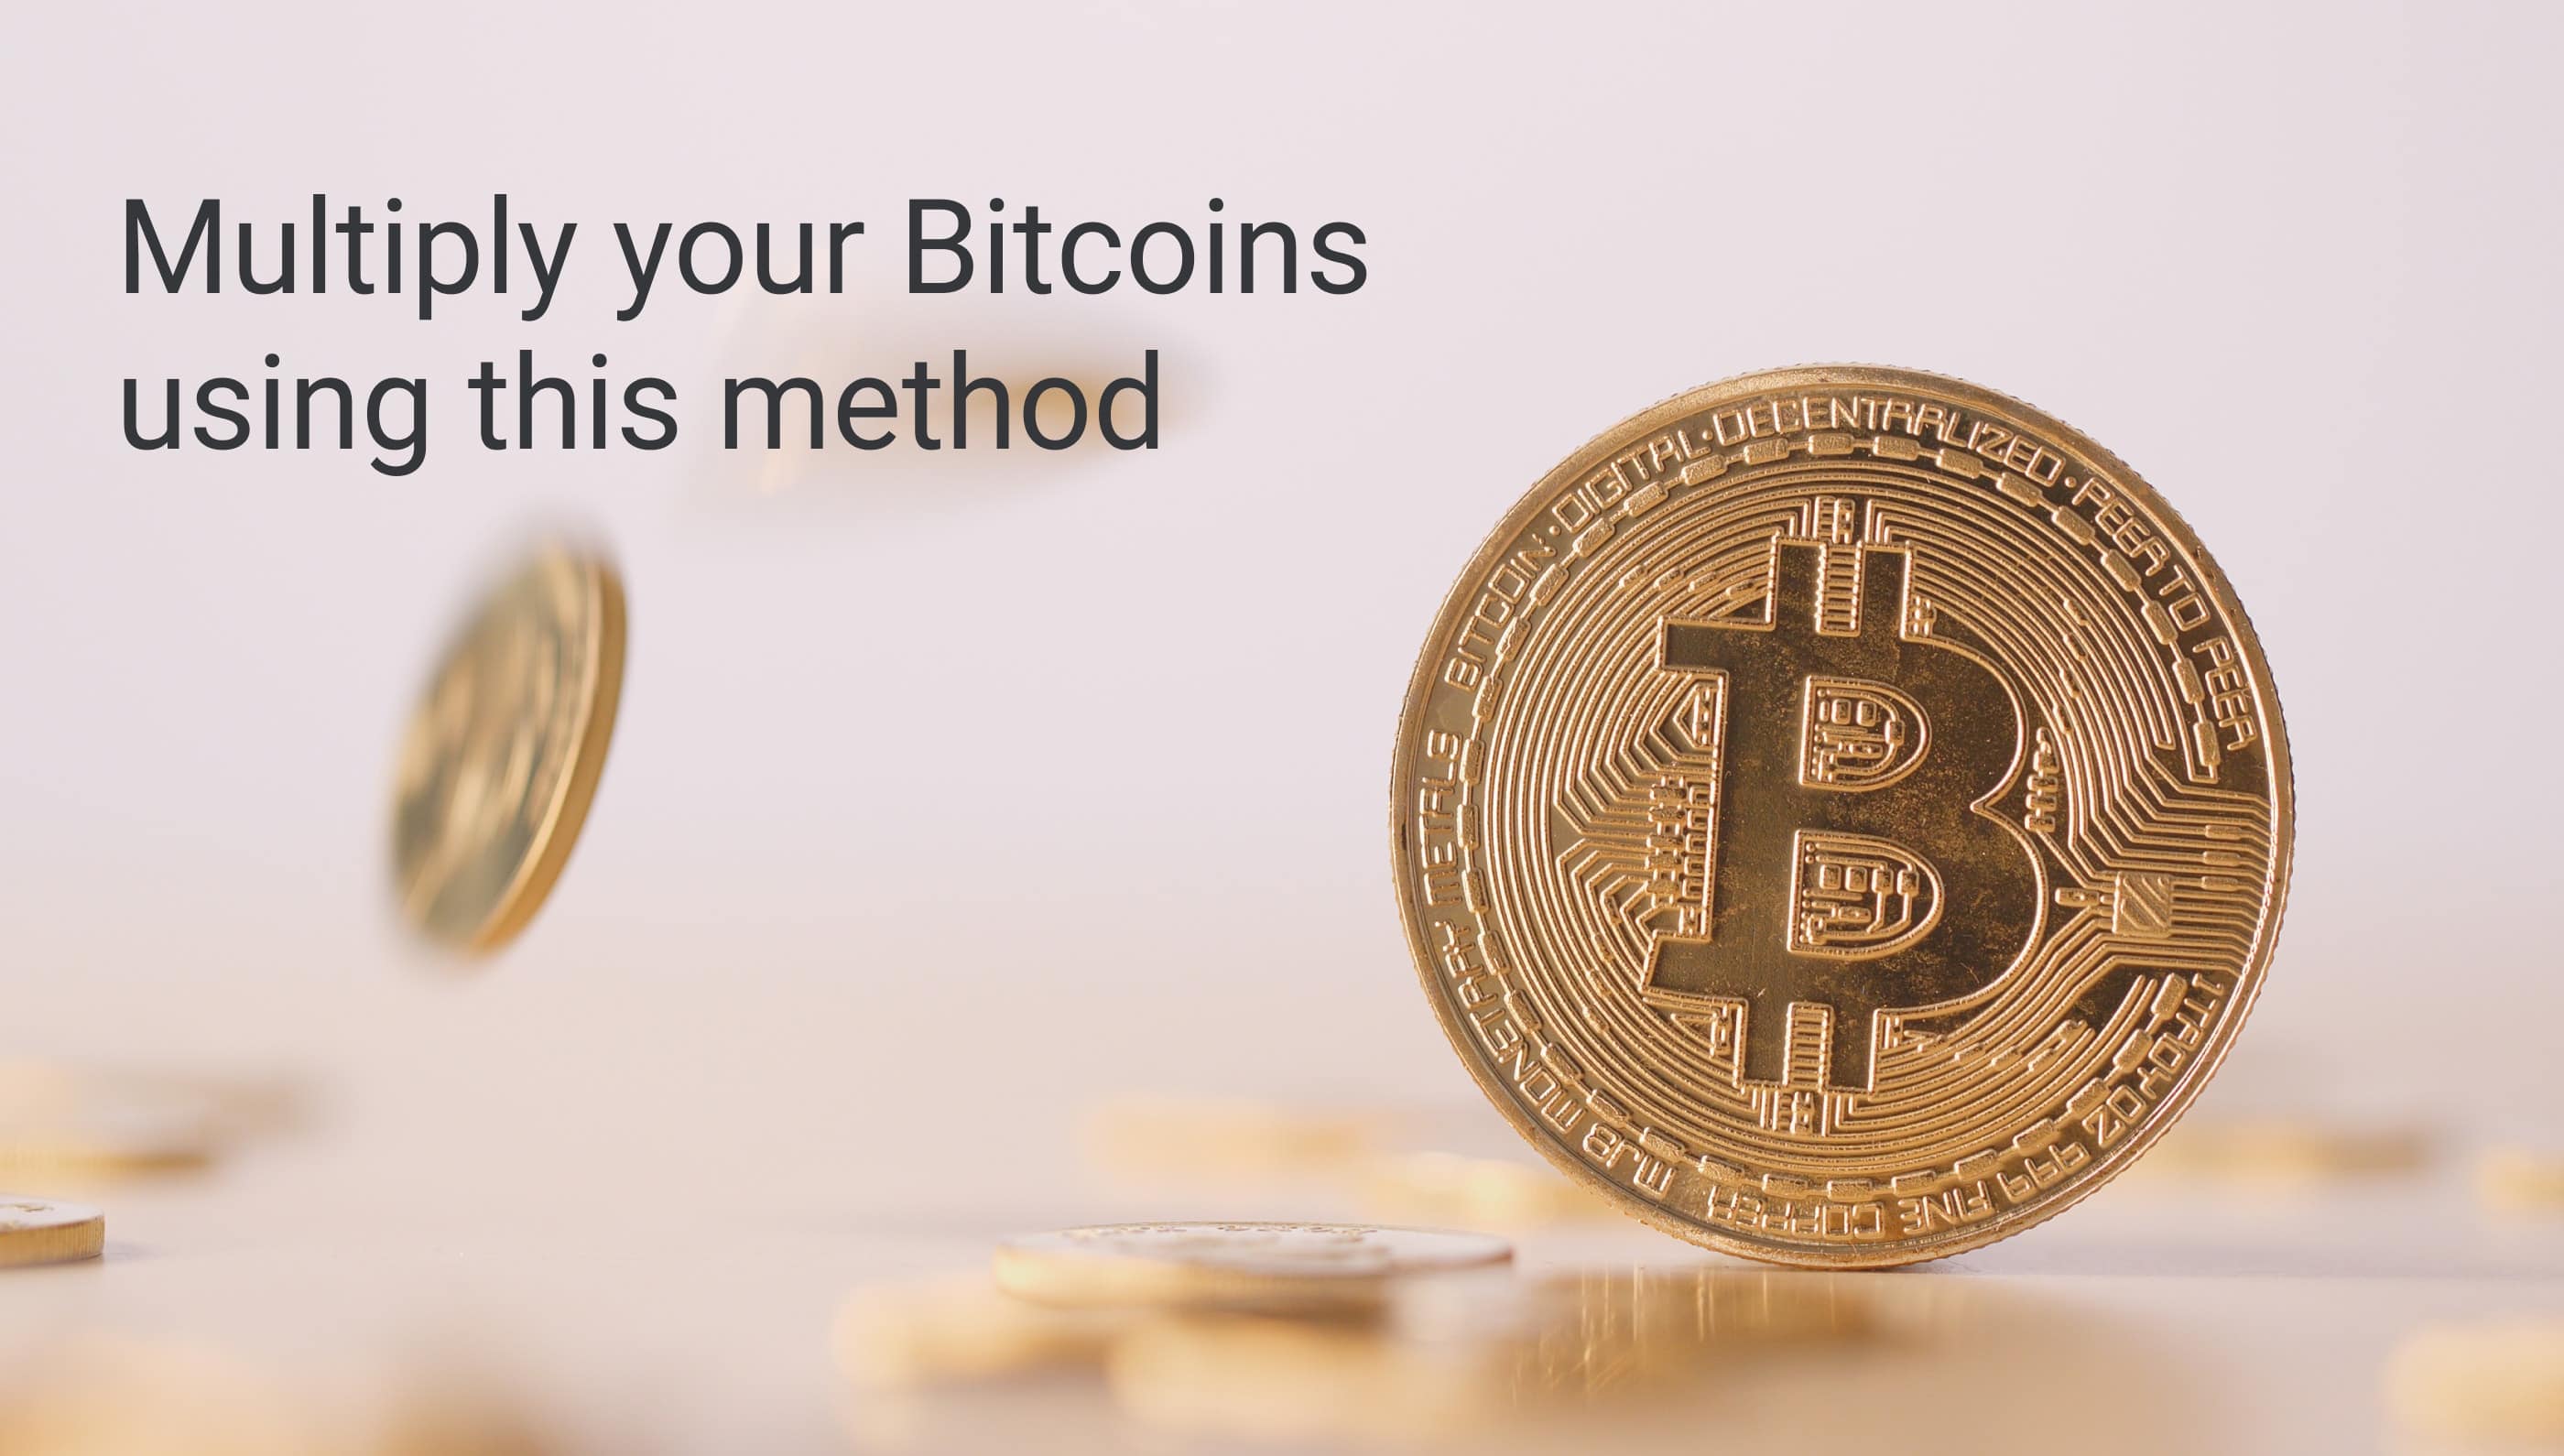 Multiply your Bitcoins using this method